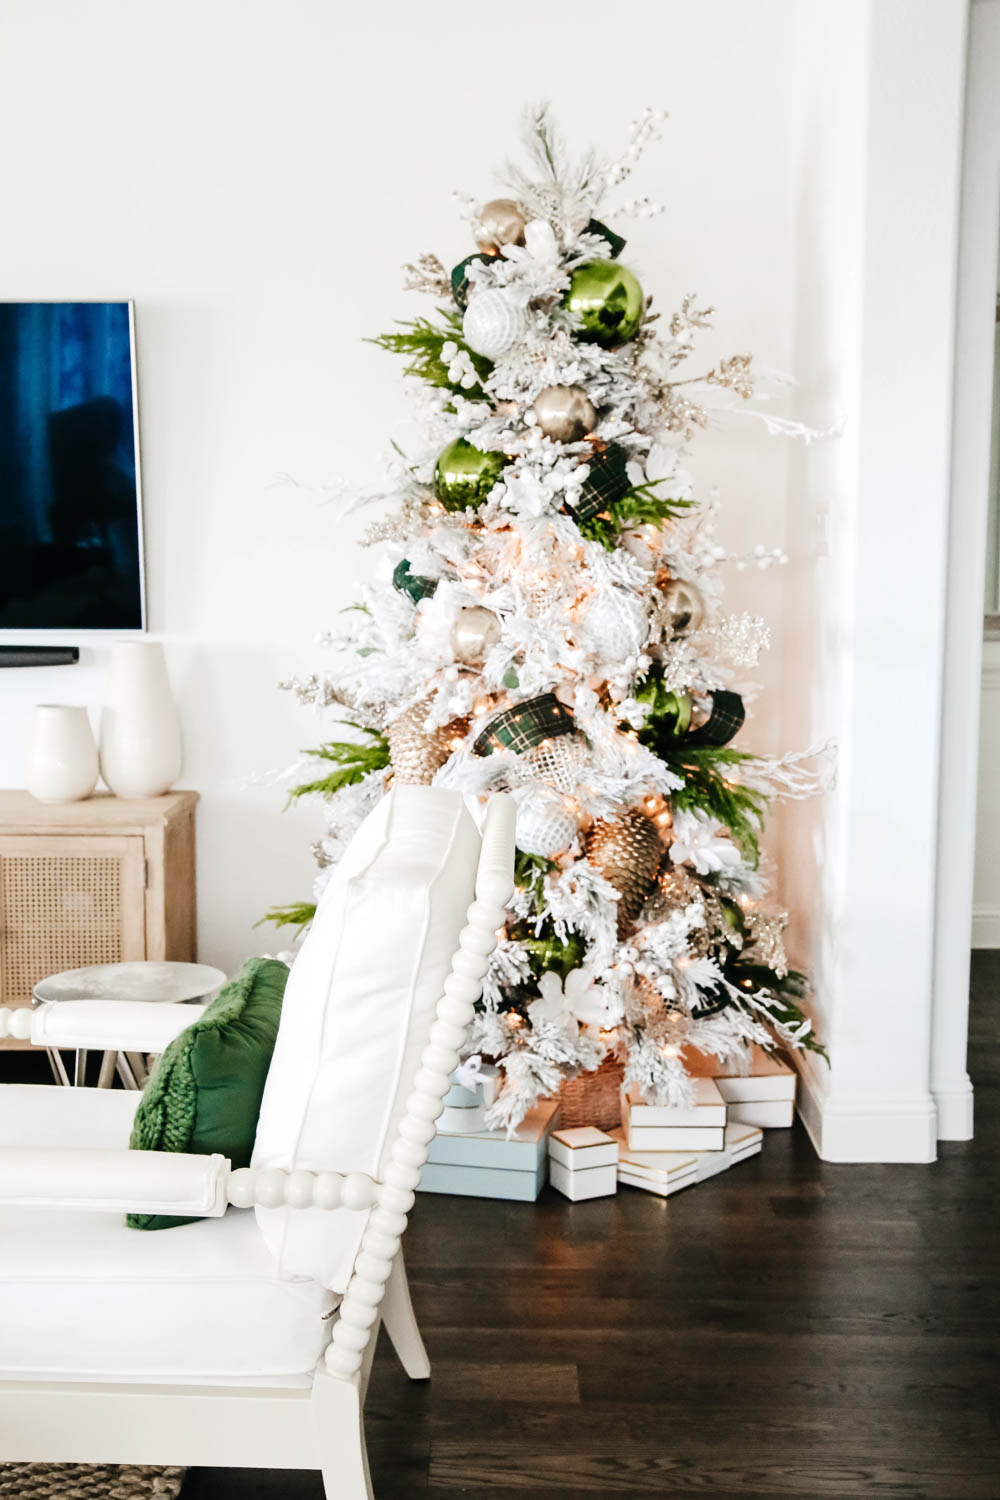 How To Decorate A Christmas Tree Like A Professional - 2022